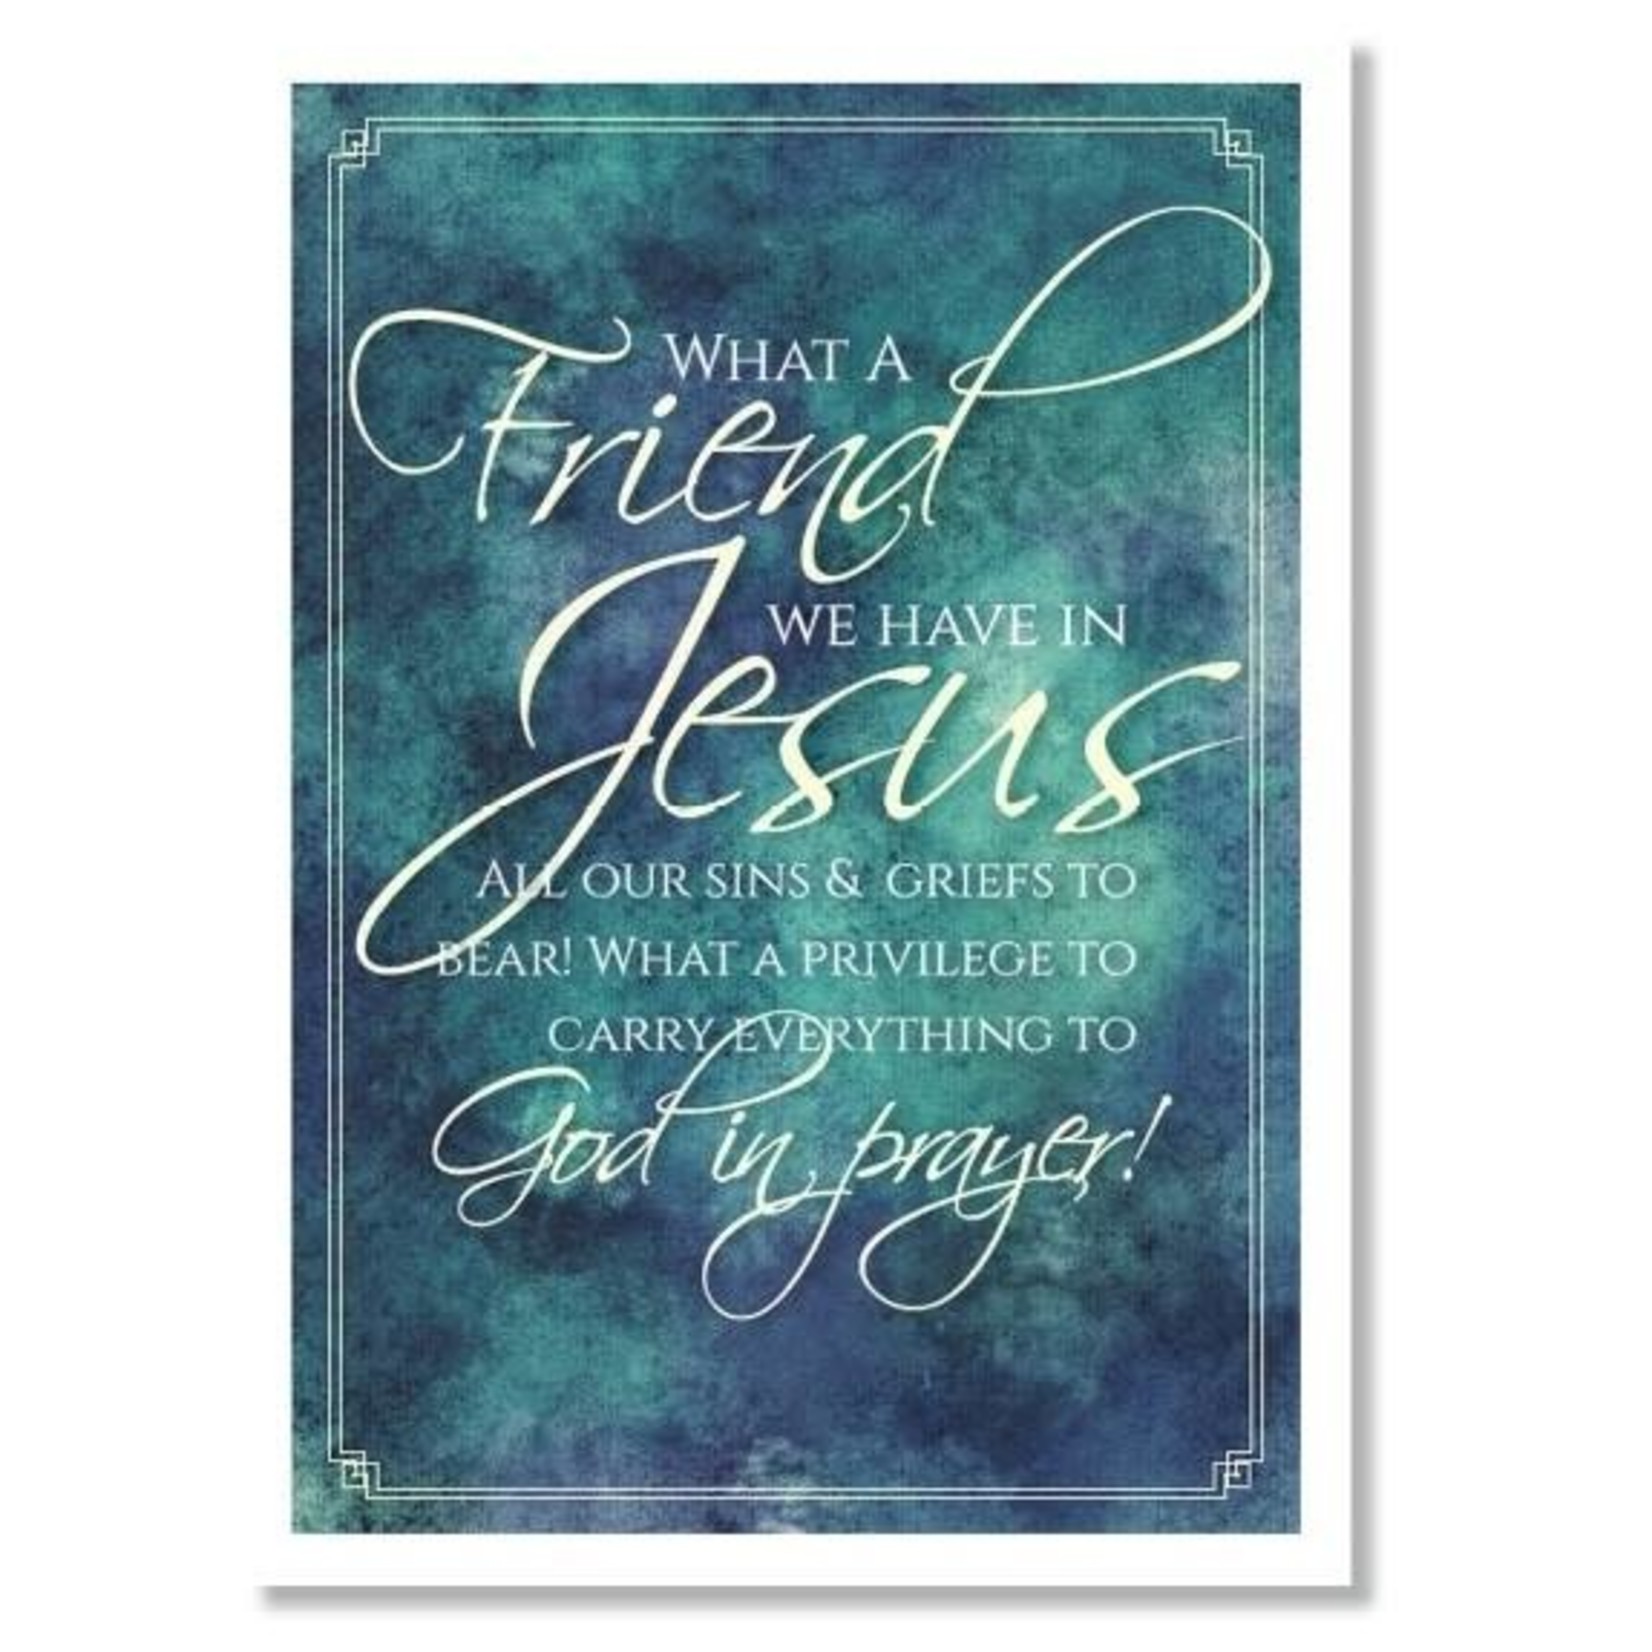 Hymns In My Heart Hymns In My Heart - 5x7" Greeting Card - Friendship - What a Friend We Have In Jesus